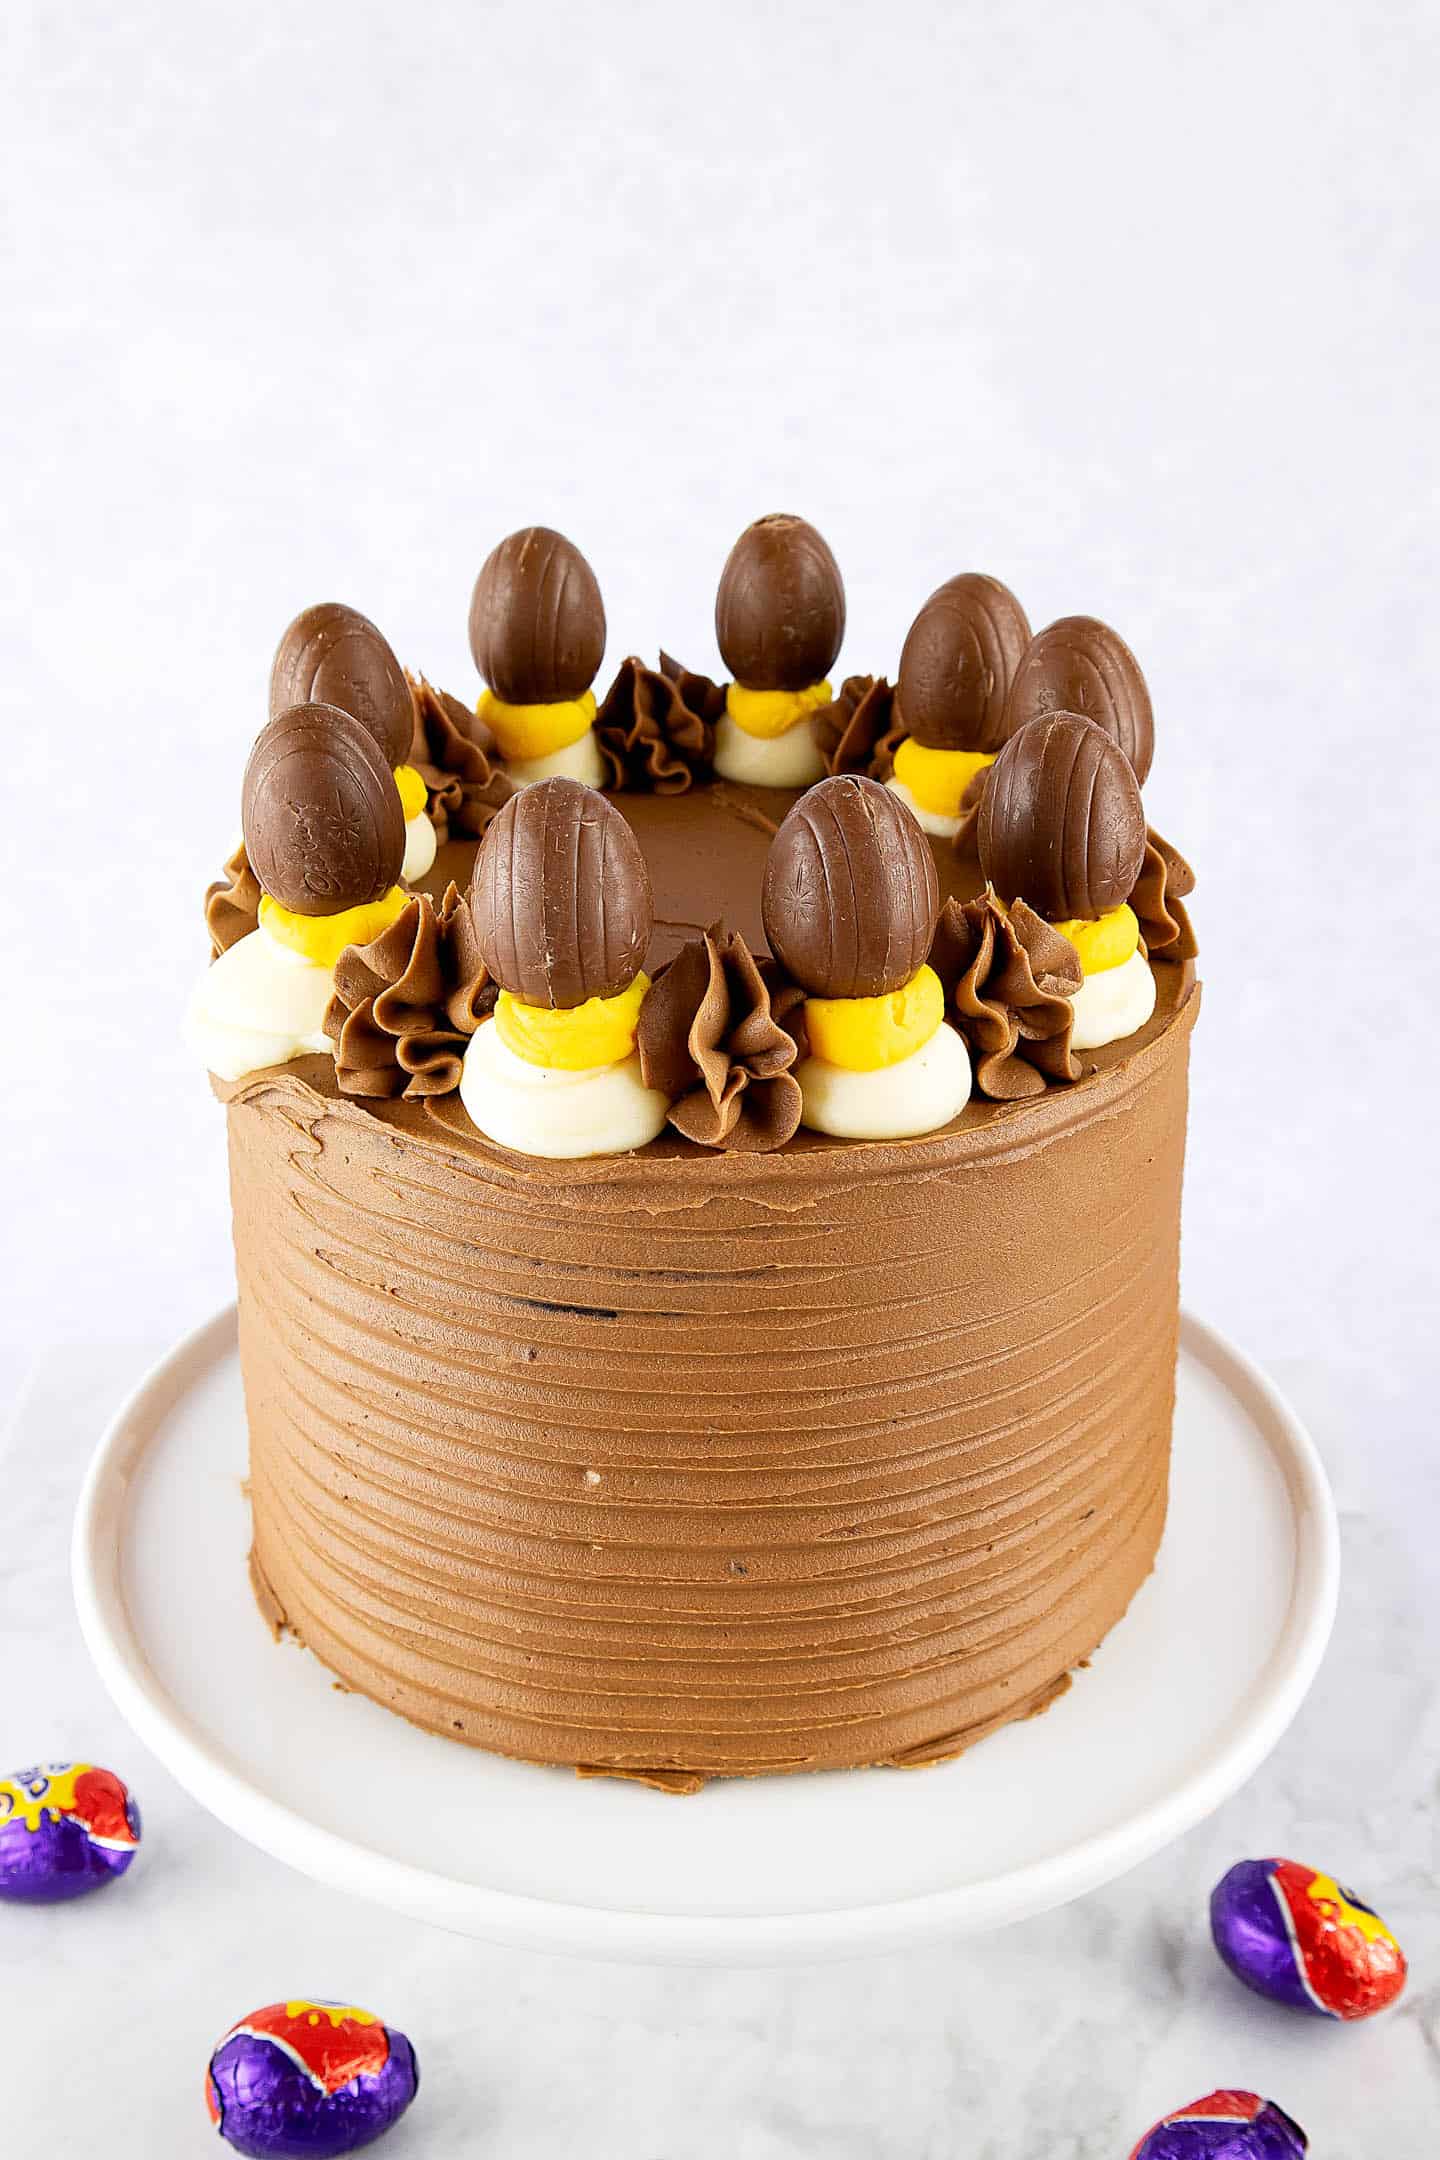 Chocolate cake topped with Creme Eggs